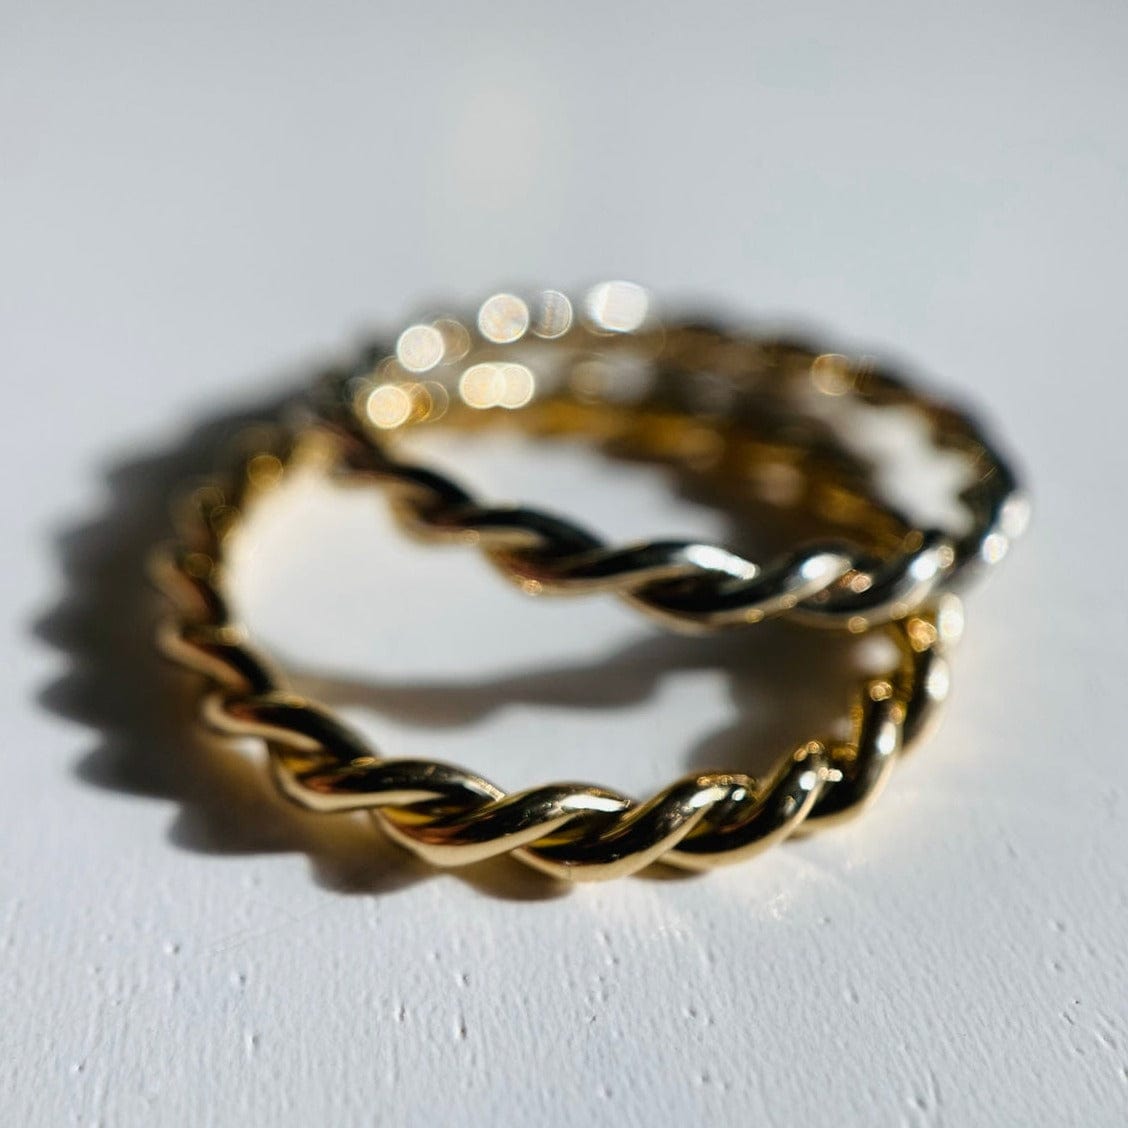 'With A Twist' Ring